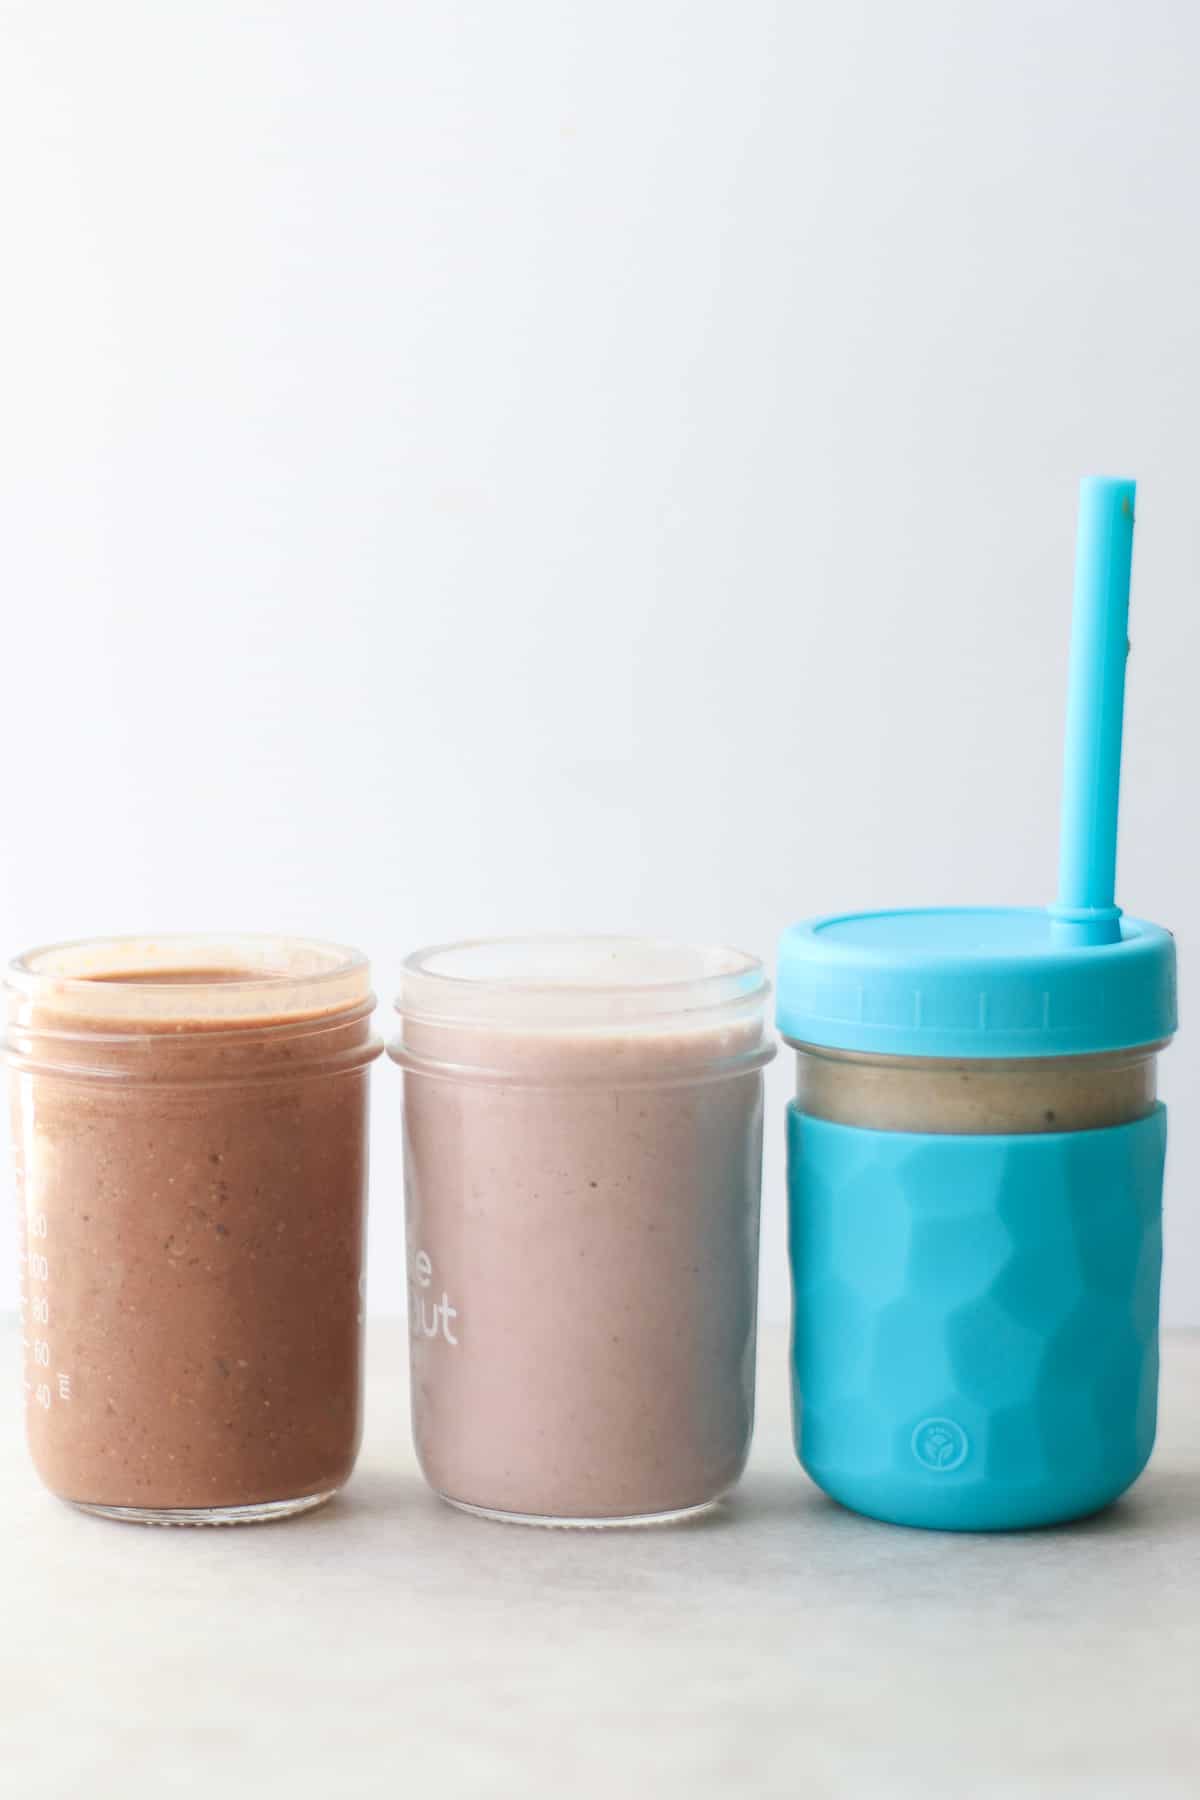 3 banana milkshake flavors in glass jars and a straw for one on the right.